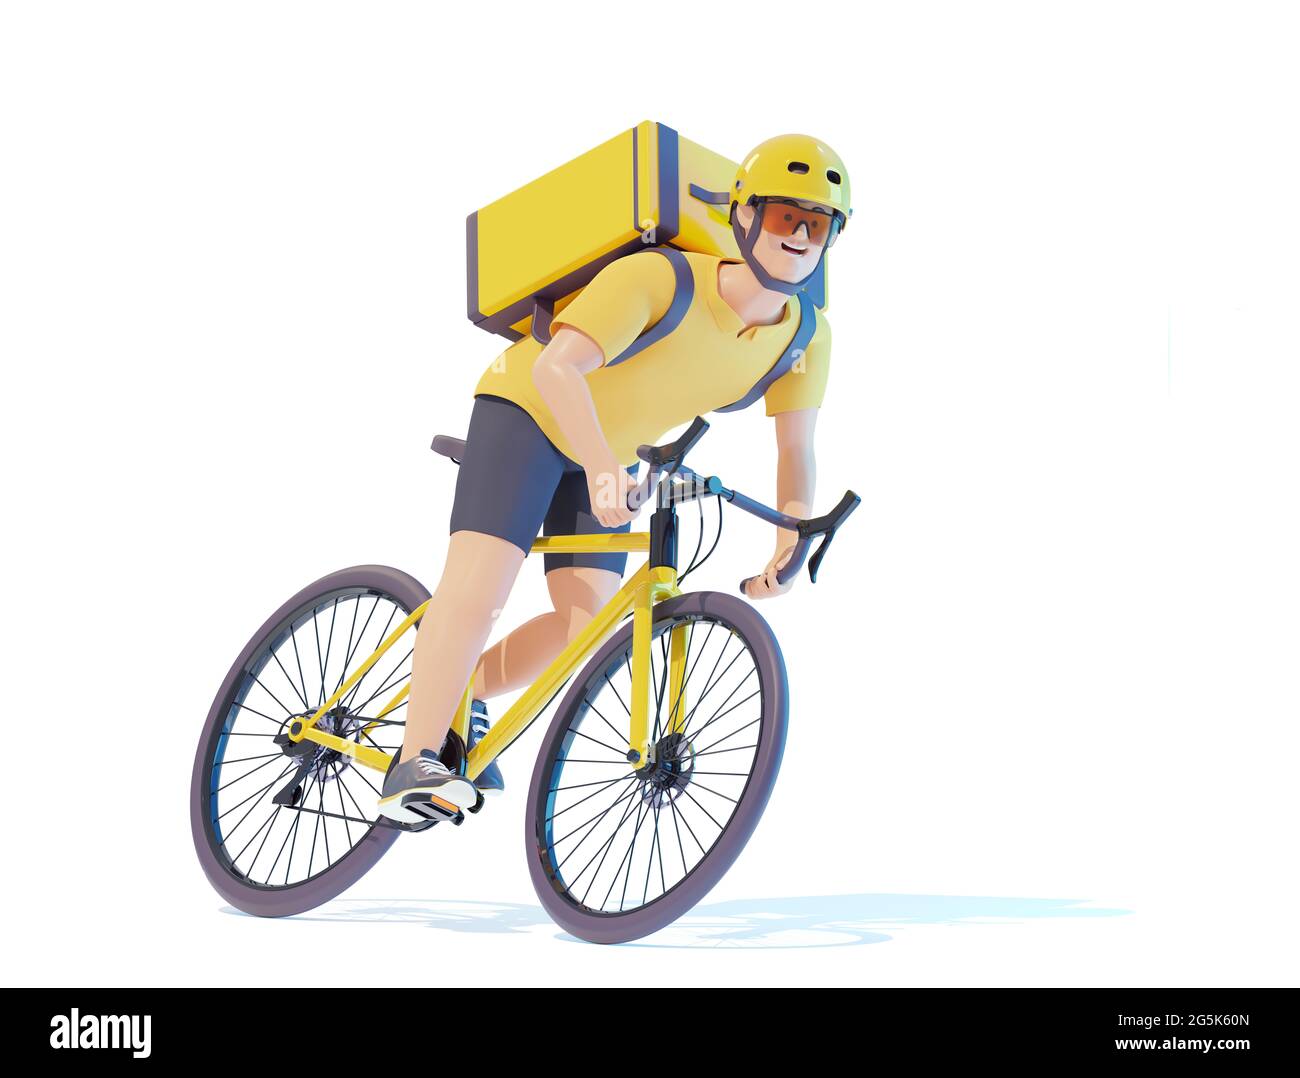 Bicycle delivery courier with parcel backpack. Courier deliveryman riding bike with thermal bag. Man delivering food, orders or parcels on bicycle. Stock Photo